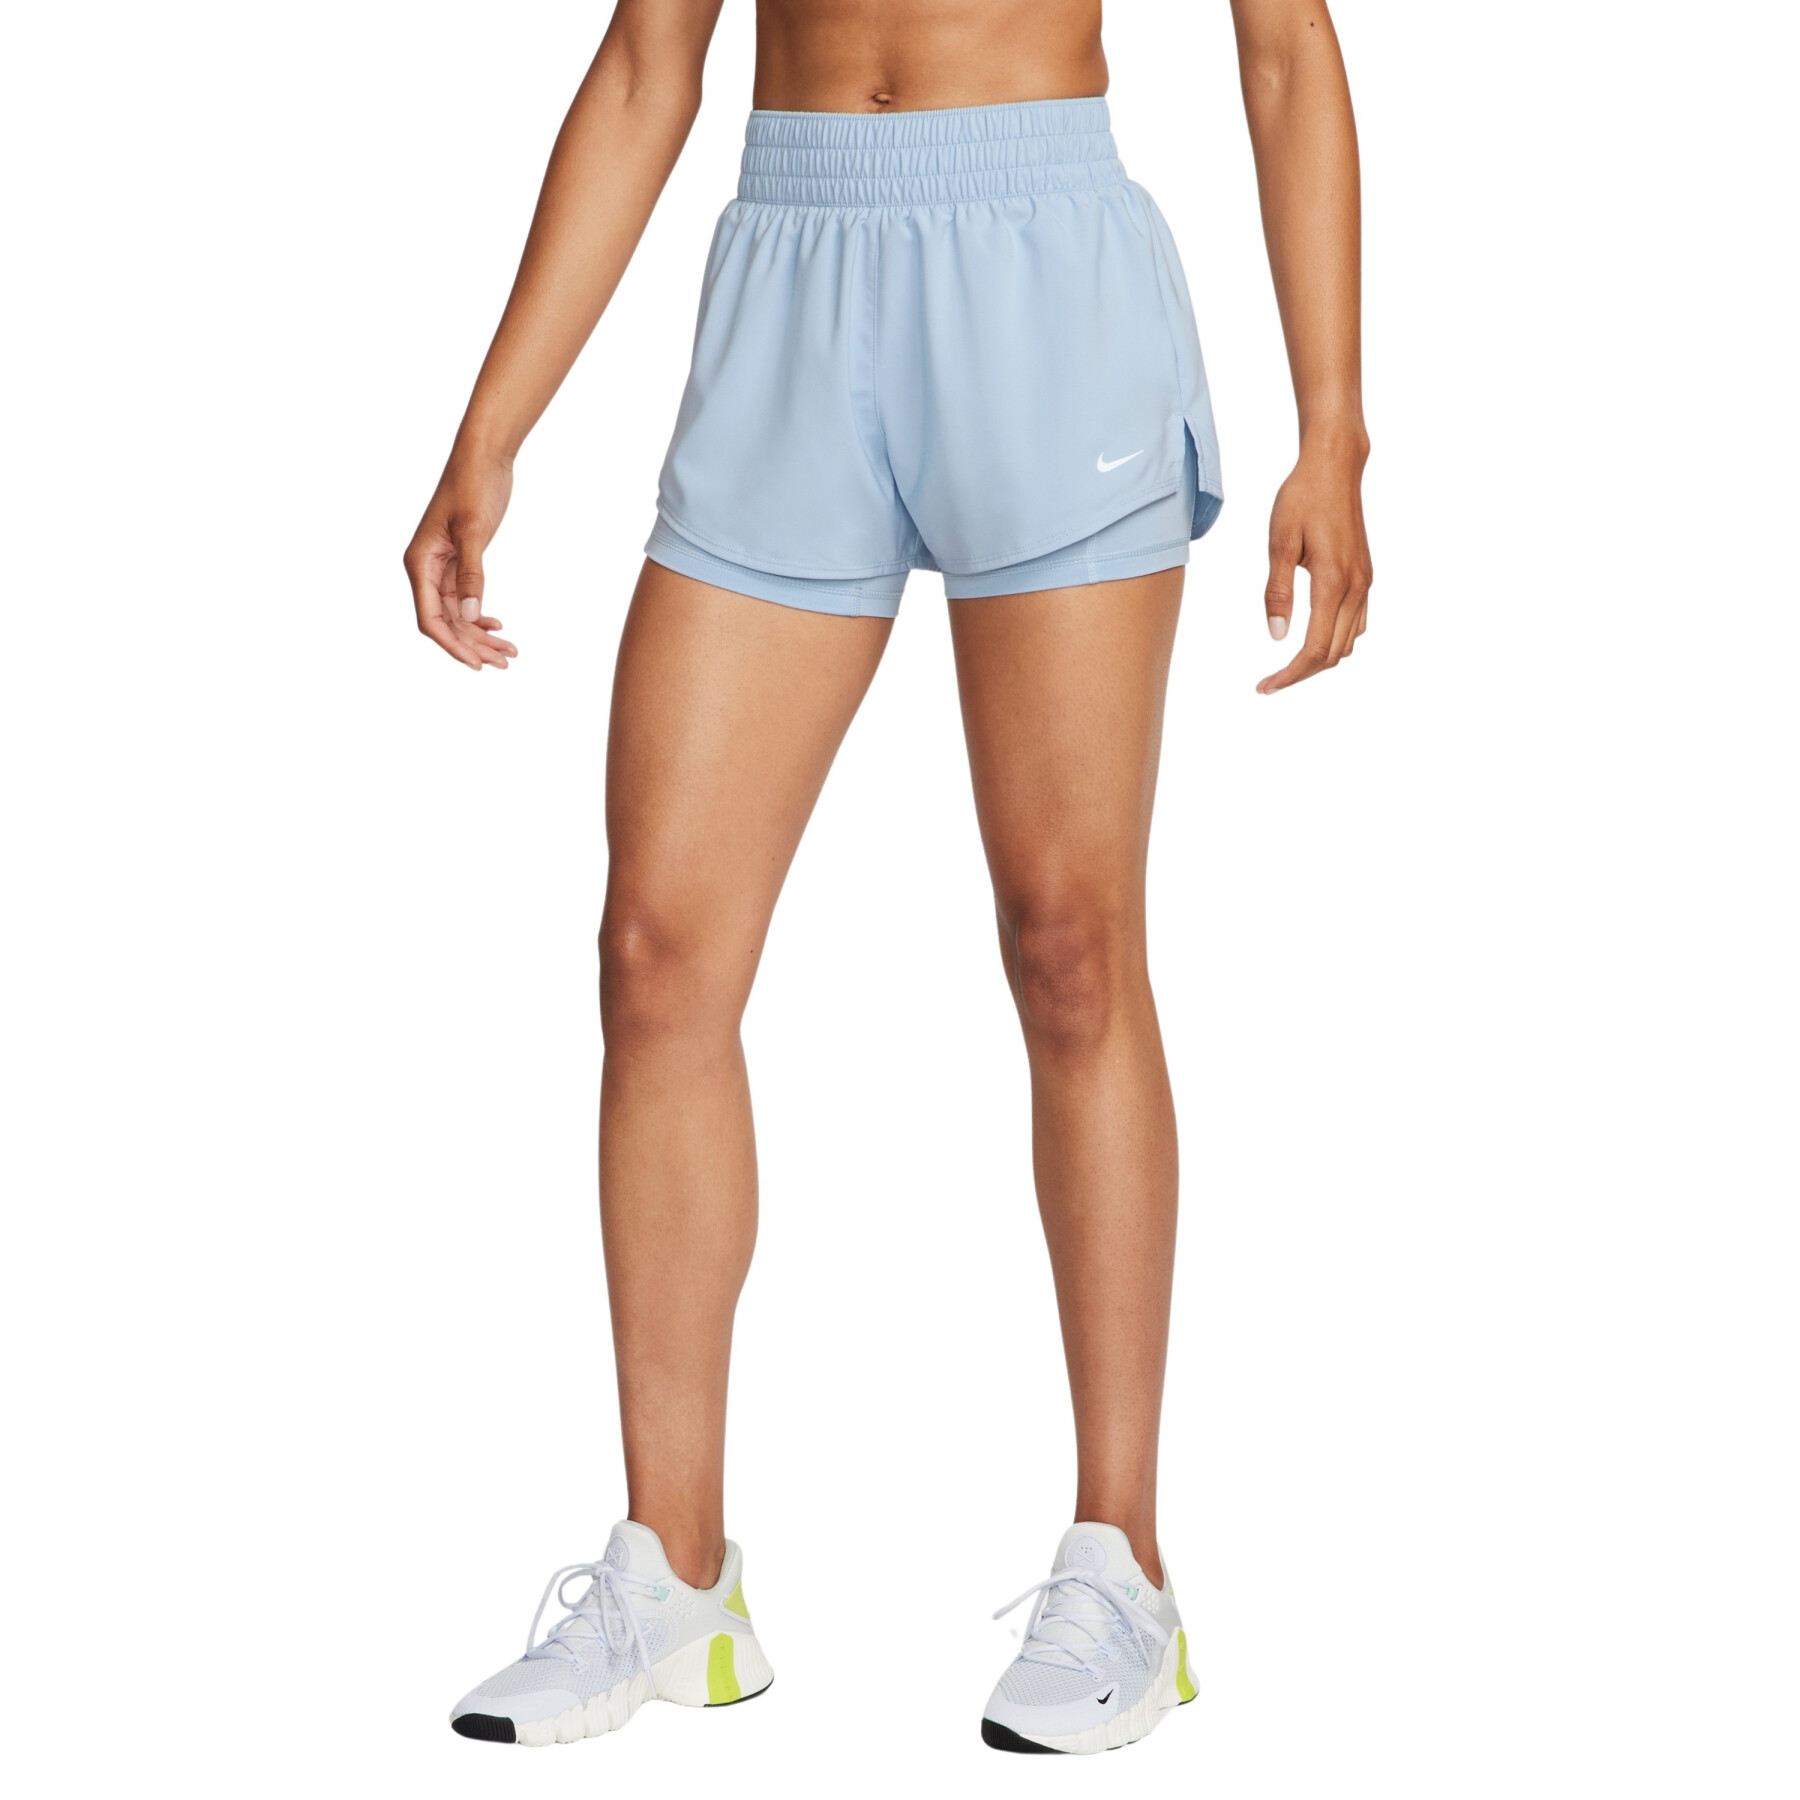 Women's 2-in-1 mid-low shorts Nike One Dri-FIT